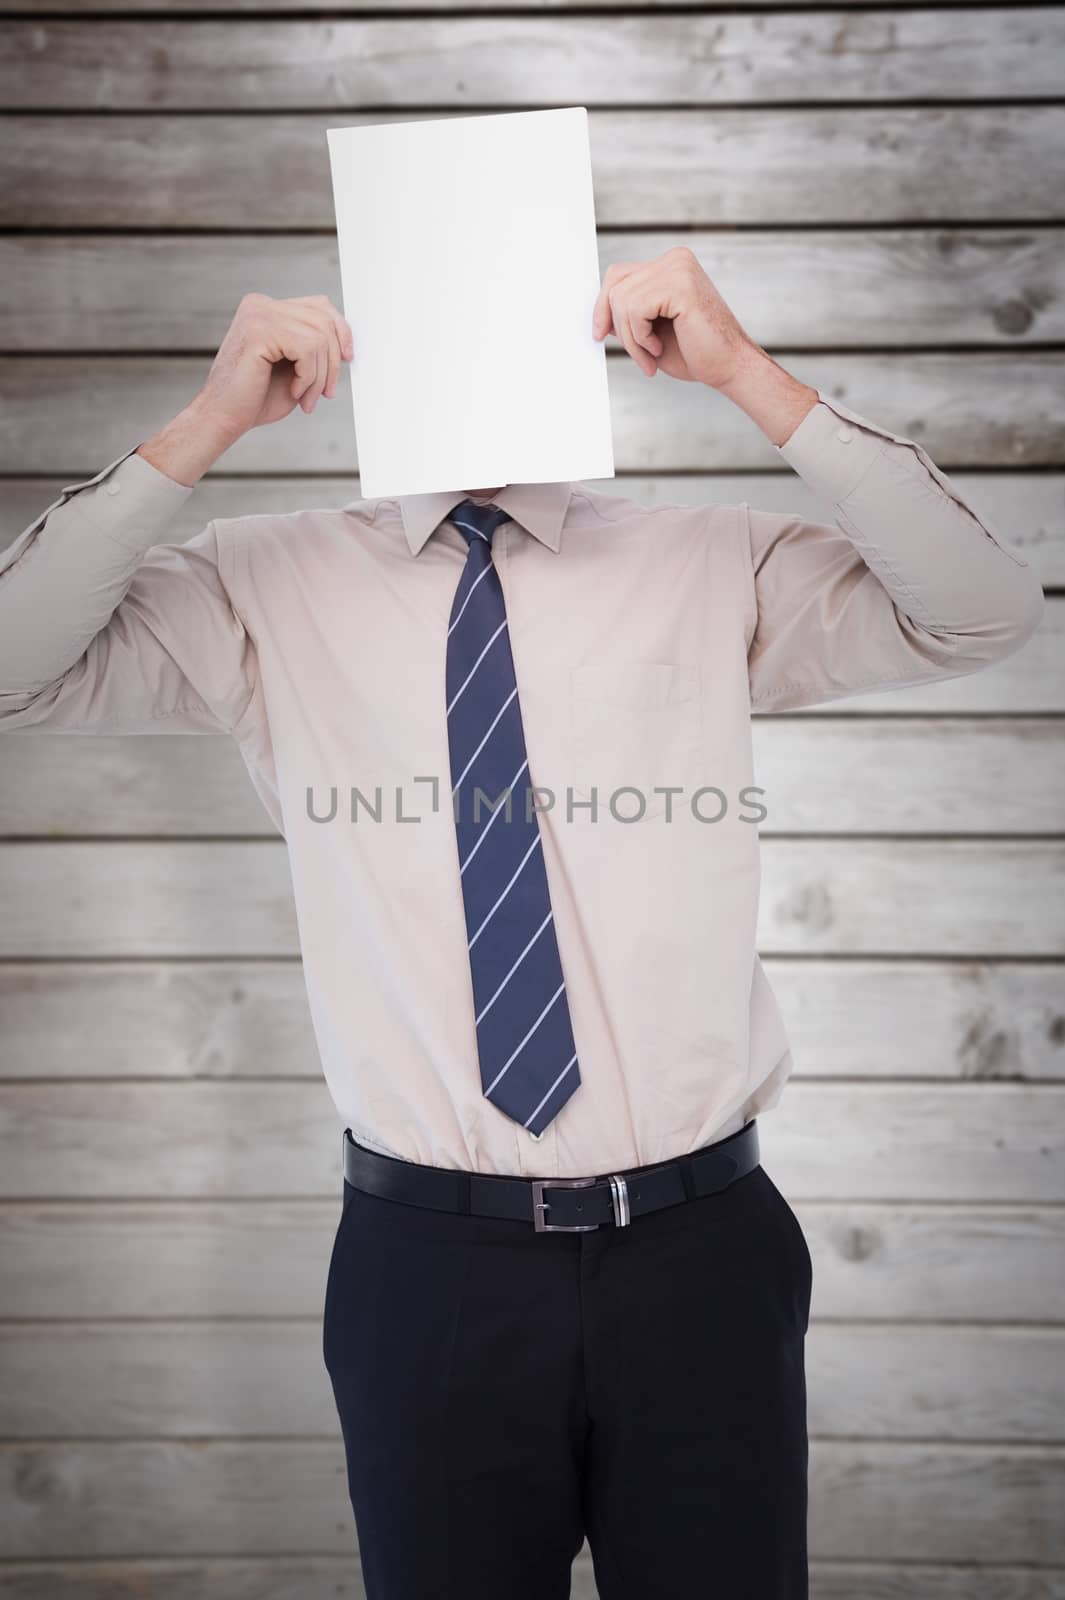 Composite image of businessman showing card in front of his head by Wavebreakmedia